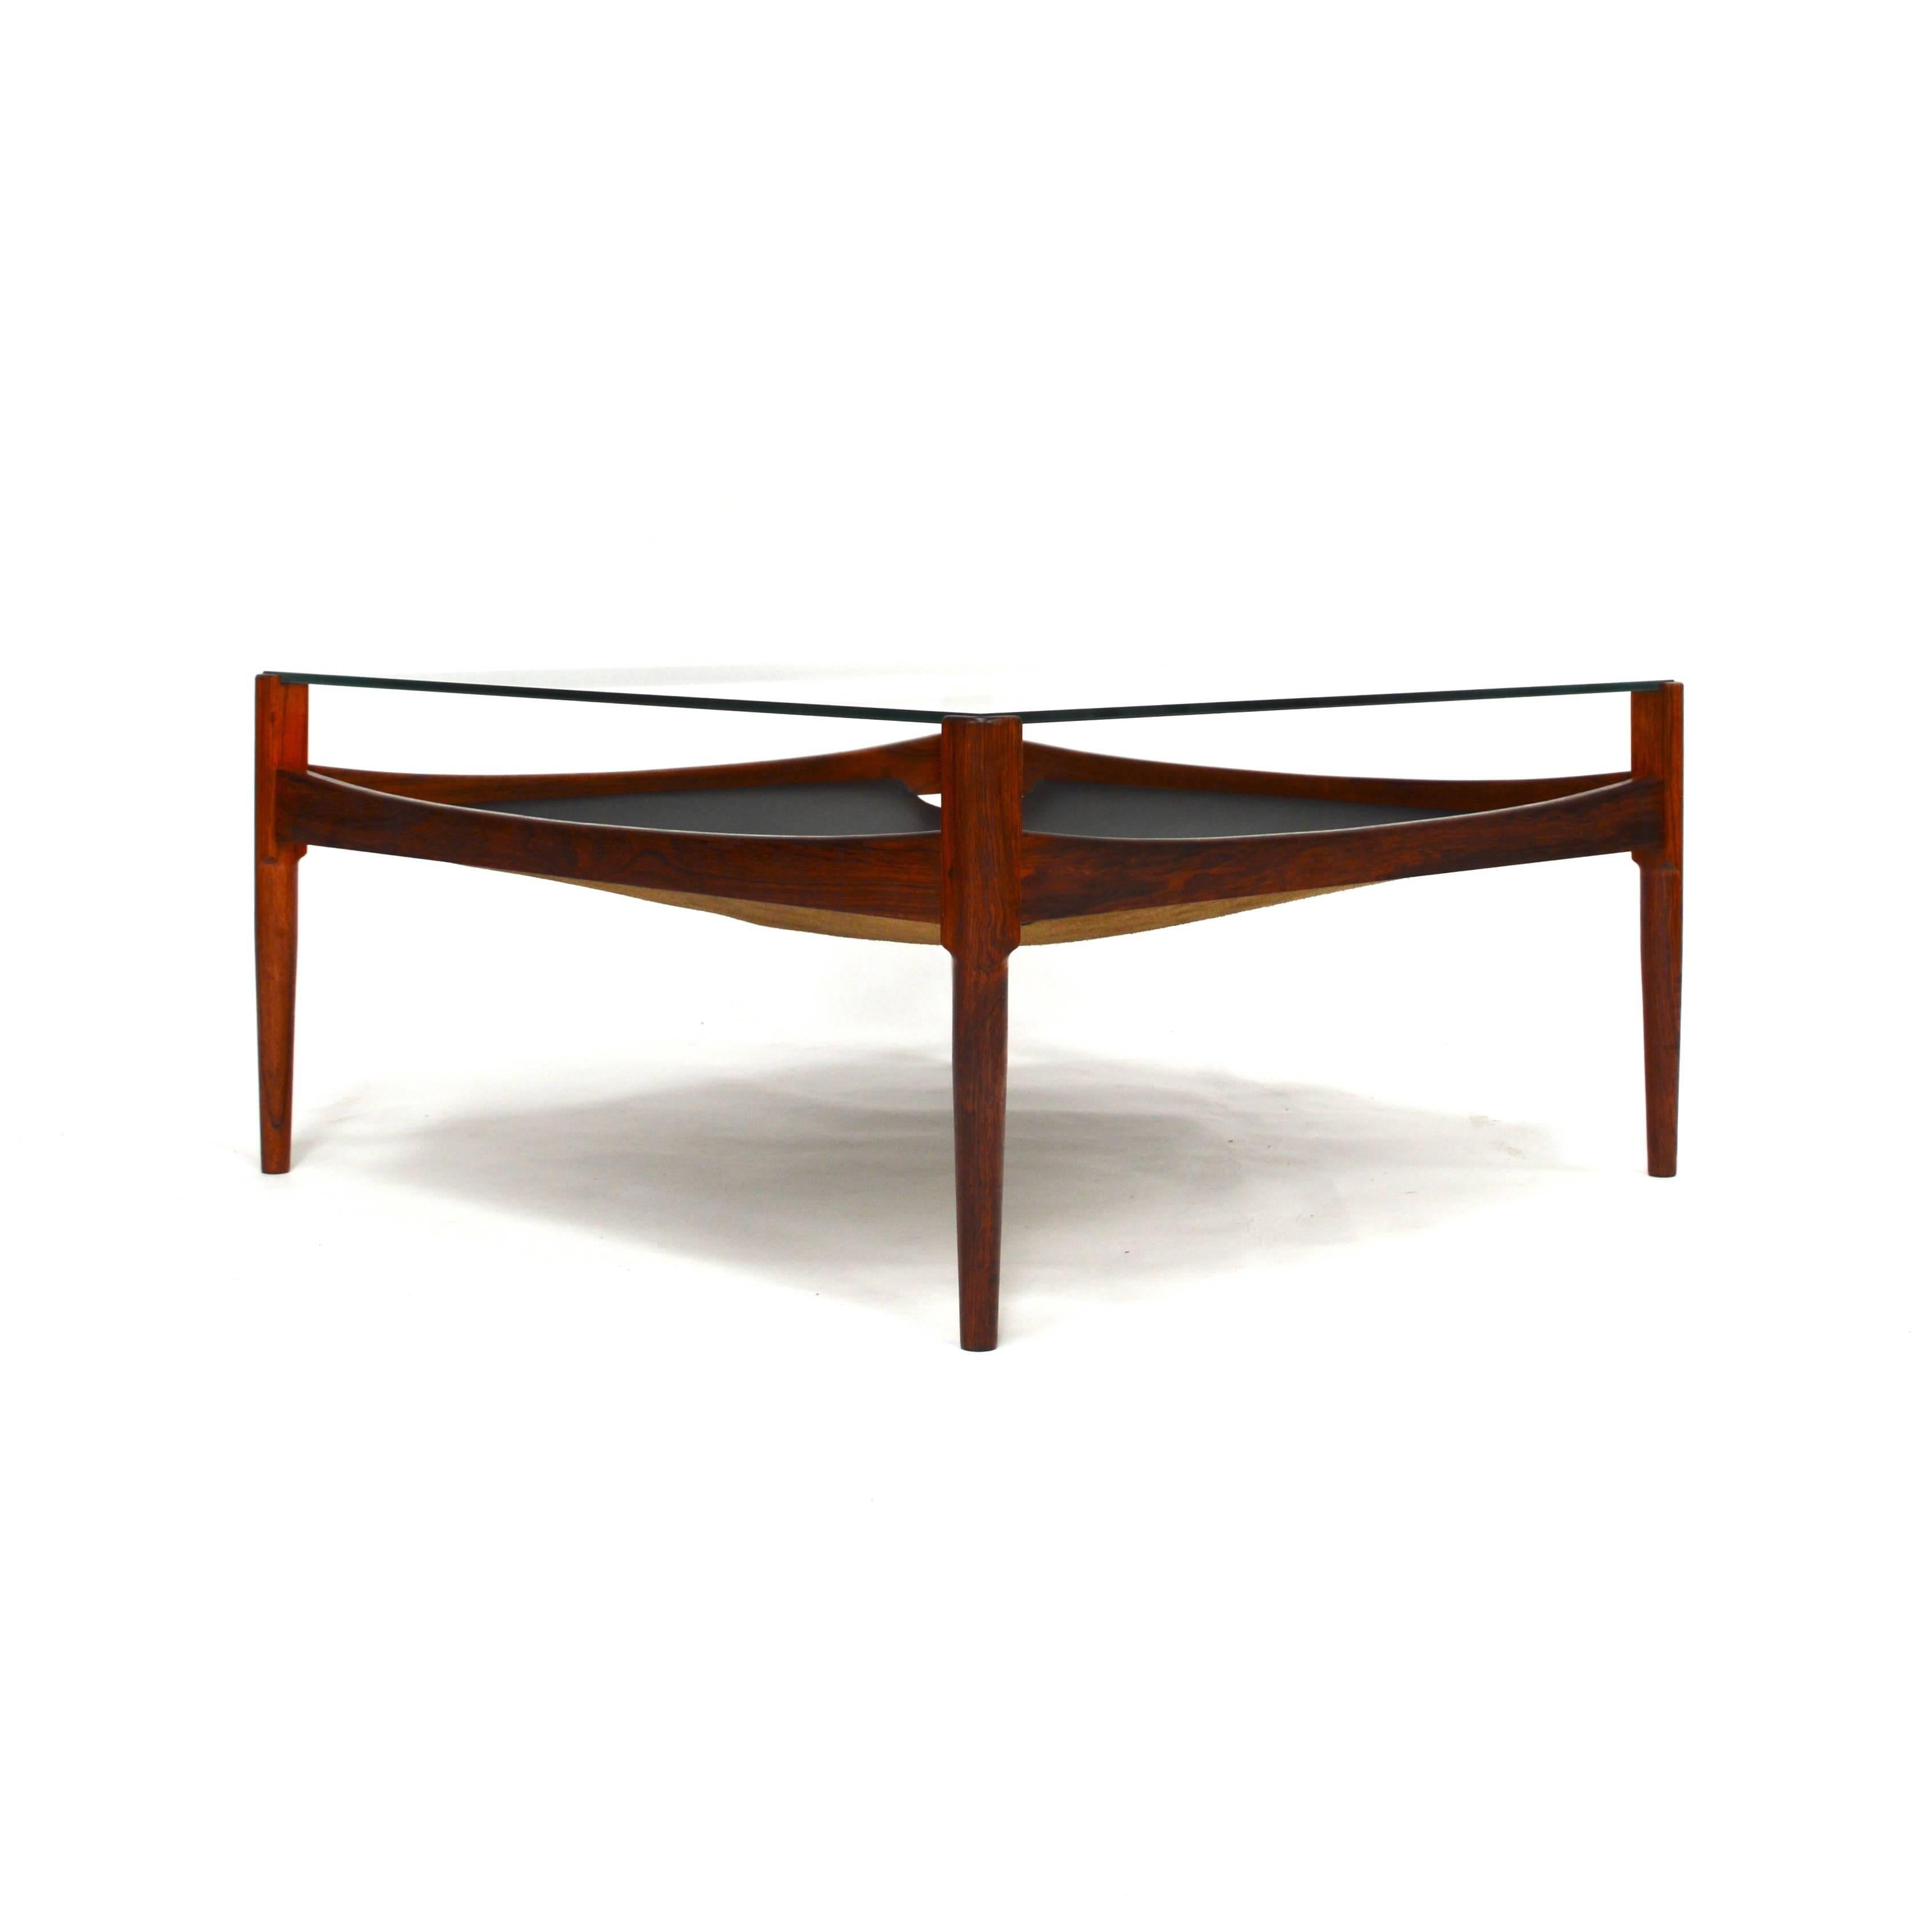 Rare coffee table by Kristian Vedel for Soren Willadsen in Denmark. 
The table is made of rosewood, glass and a black leather magazine rack. 
It is in excellent condition.